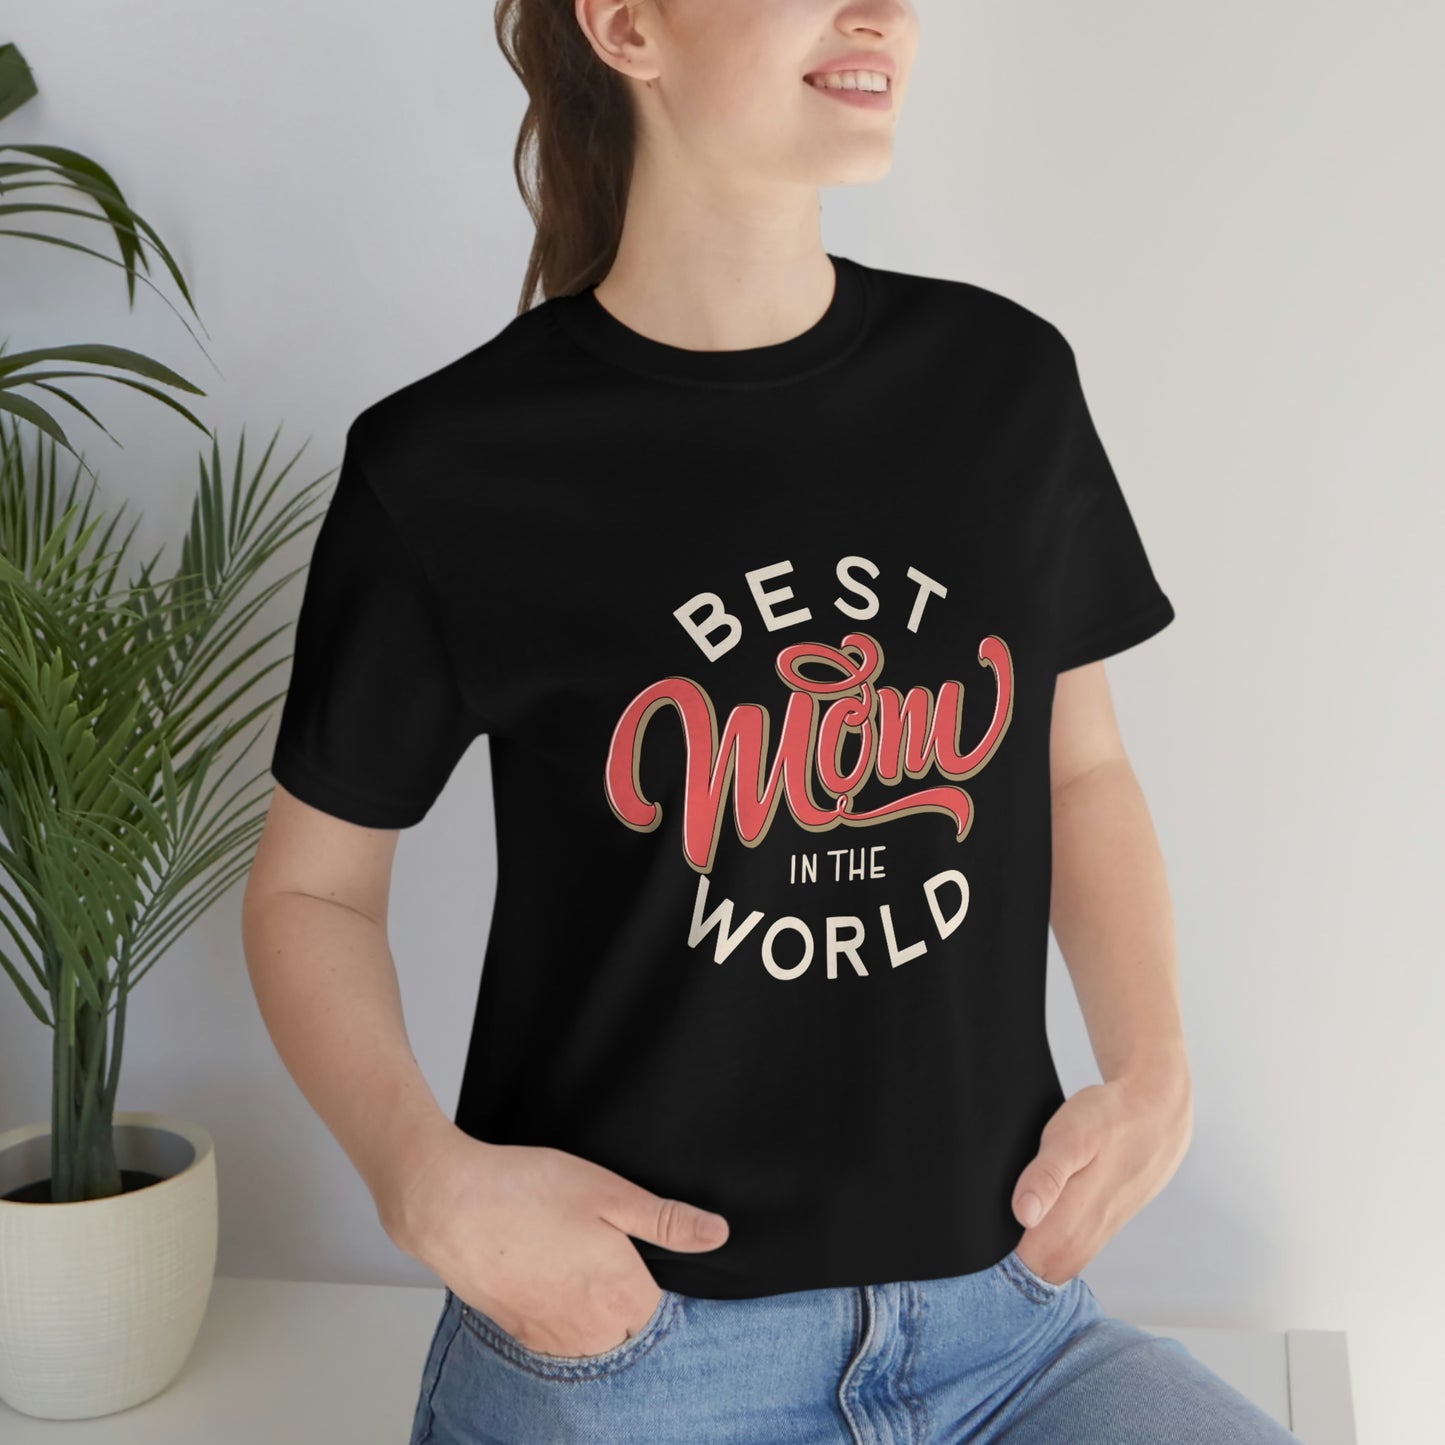 Best Mother's Day gift for Best Mom in the World. This black t-shirt is a versatile and stylish addition to any Mom's wardrobe.